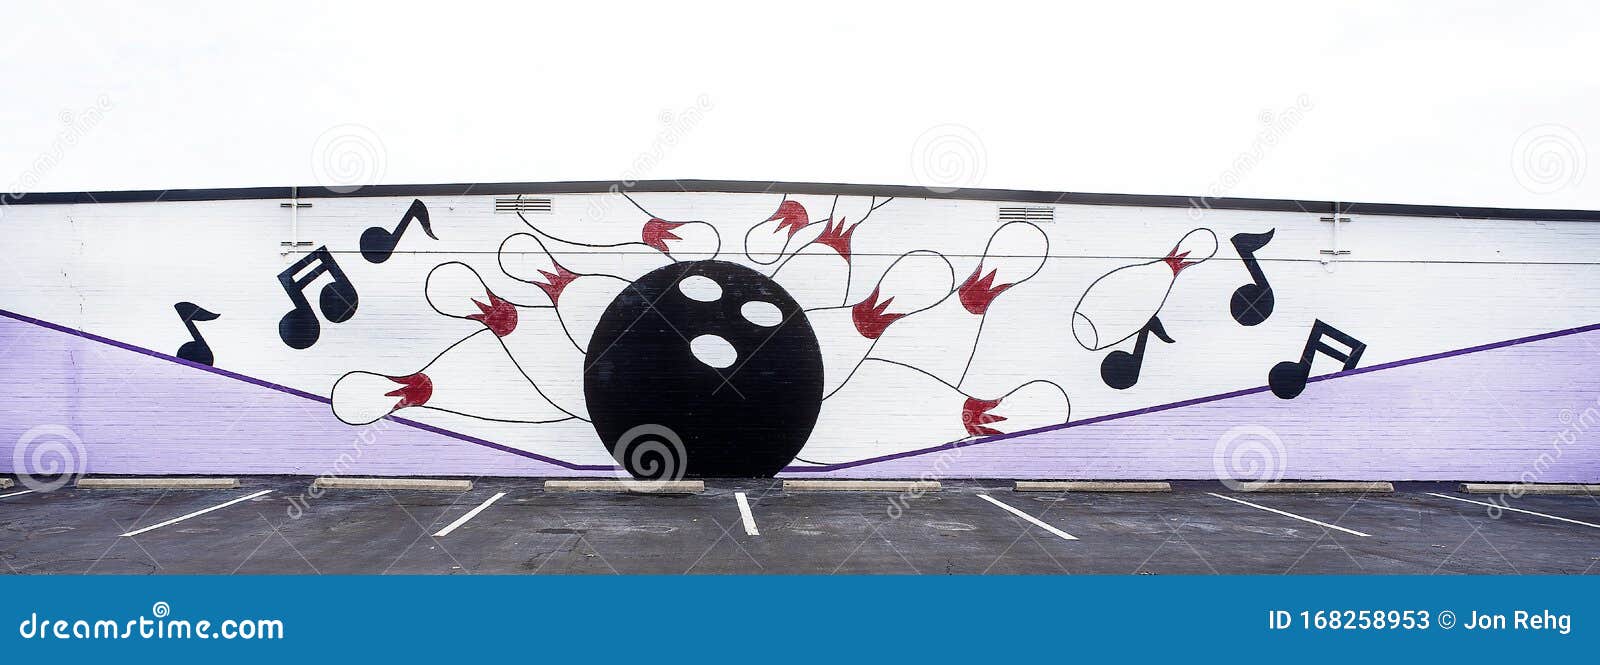 St Louis, Missouri, USA, December 2019 - Bowling Ball And Pins Spray Painted Mural On Side Of ...